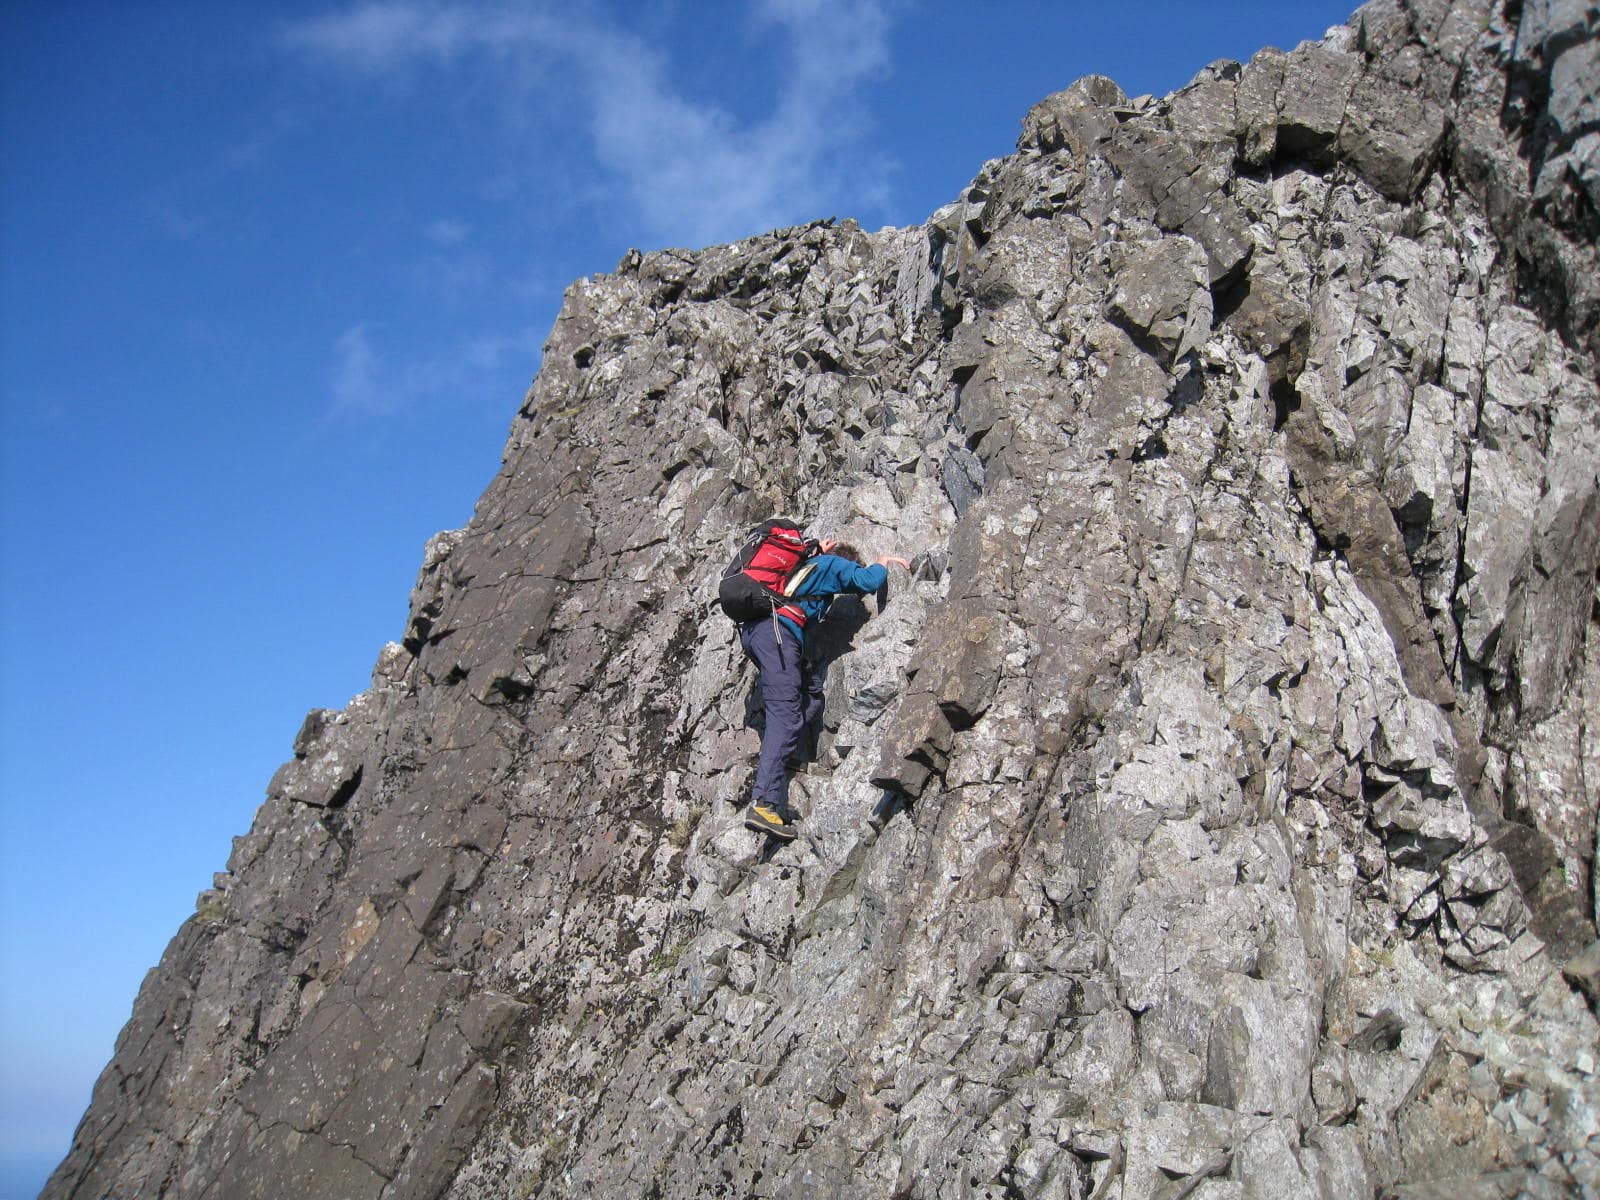 Cuillin ridge traverse - A typical ground on the cuillins